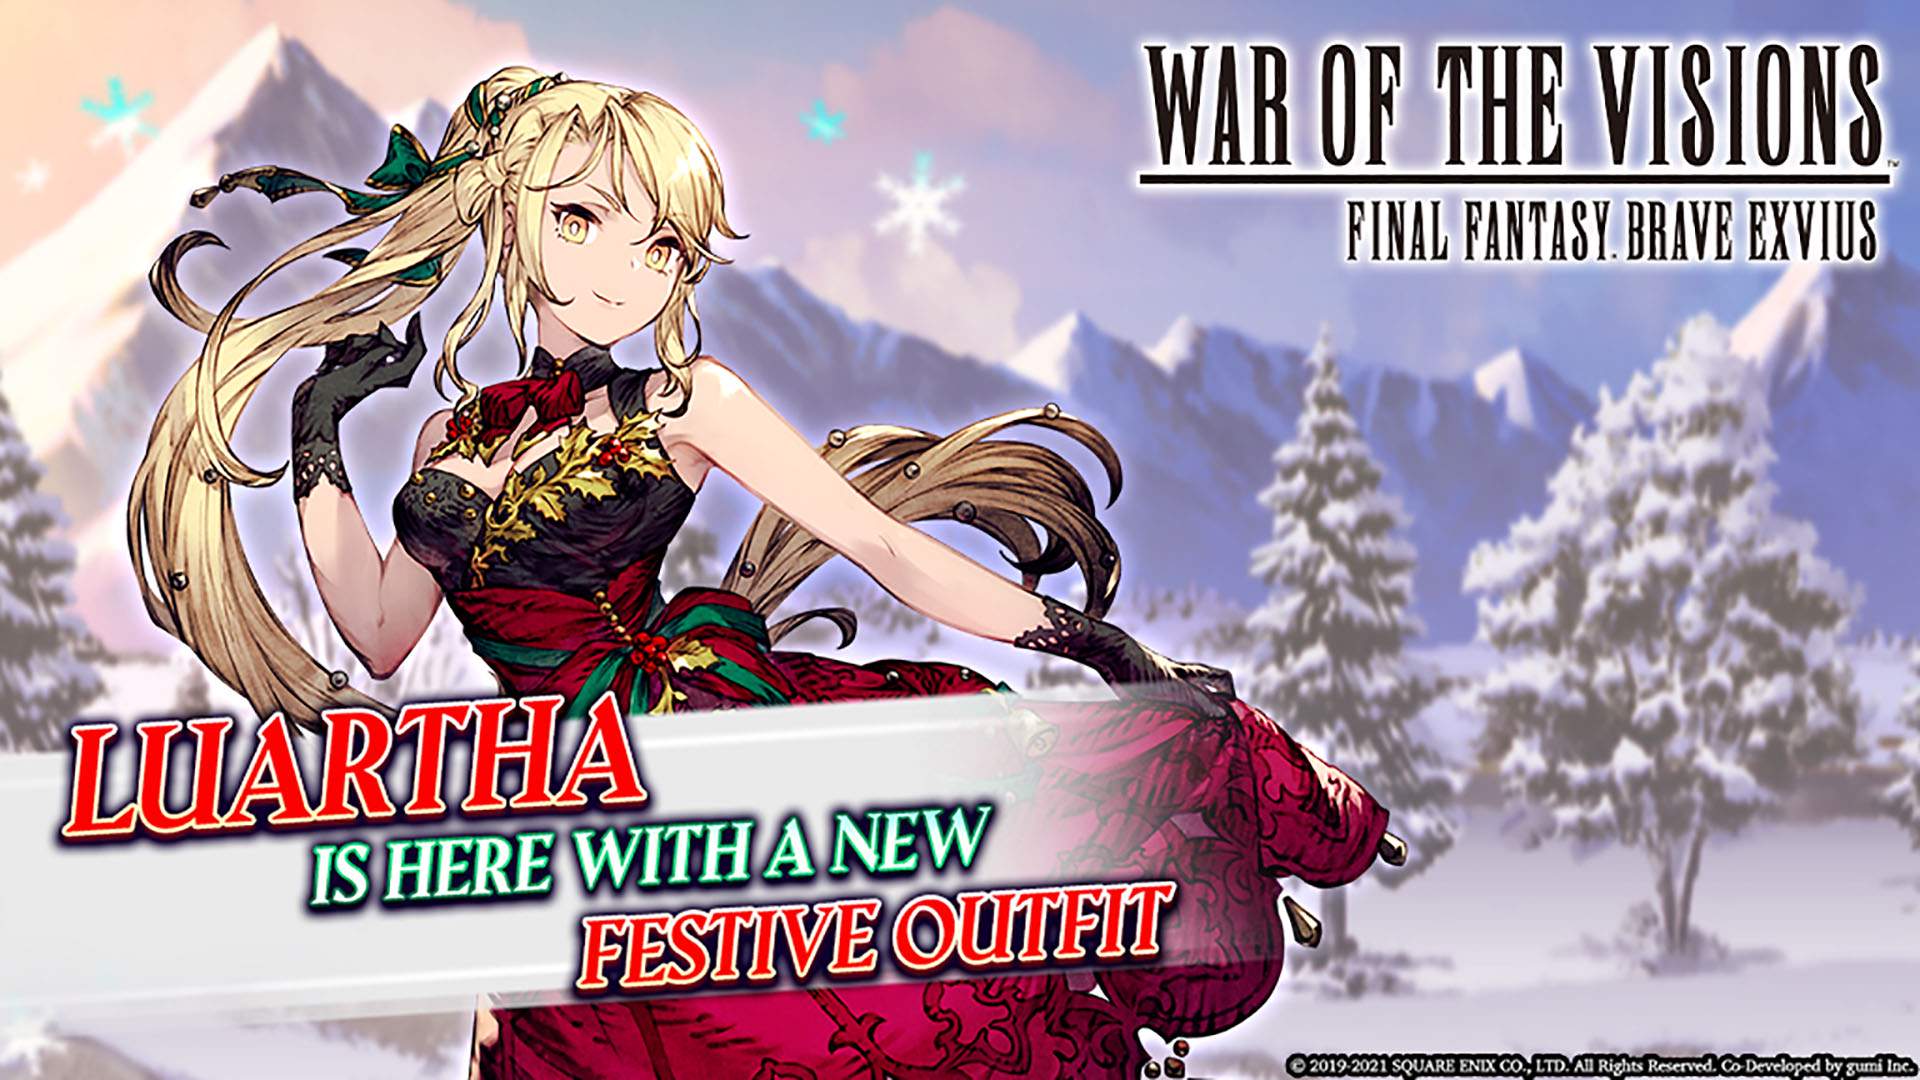 New seasonal unit Luartha with her new festive outfit